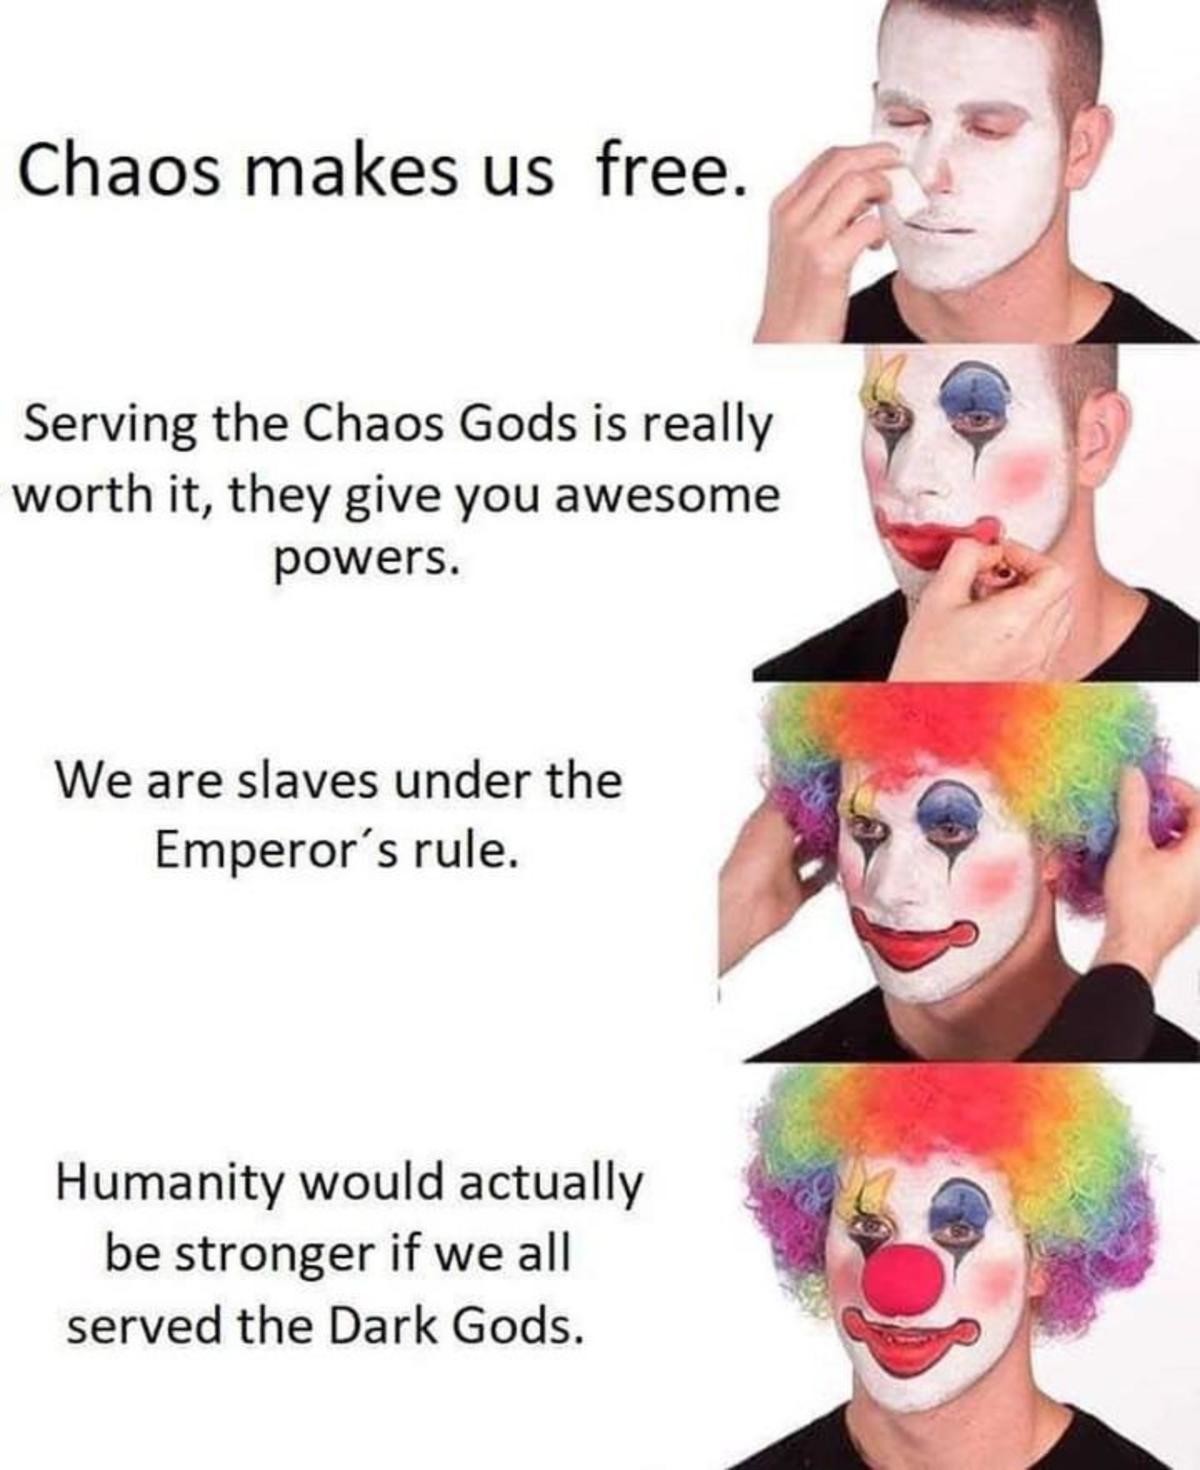 pagliacci meme - Chaos makes us free. Serving the Chaos Gods is really worth it, they give you awesome powers. We are slaves under the Emperor's rule. Humanity would actually be stronger if we all served the Dark Gods.